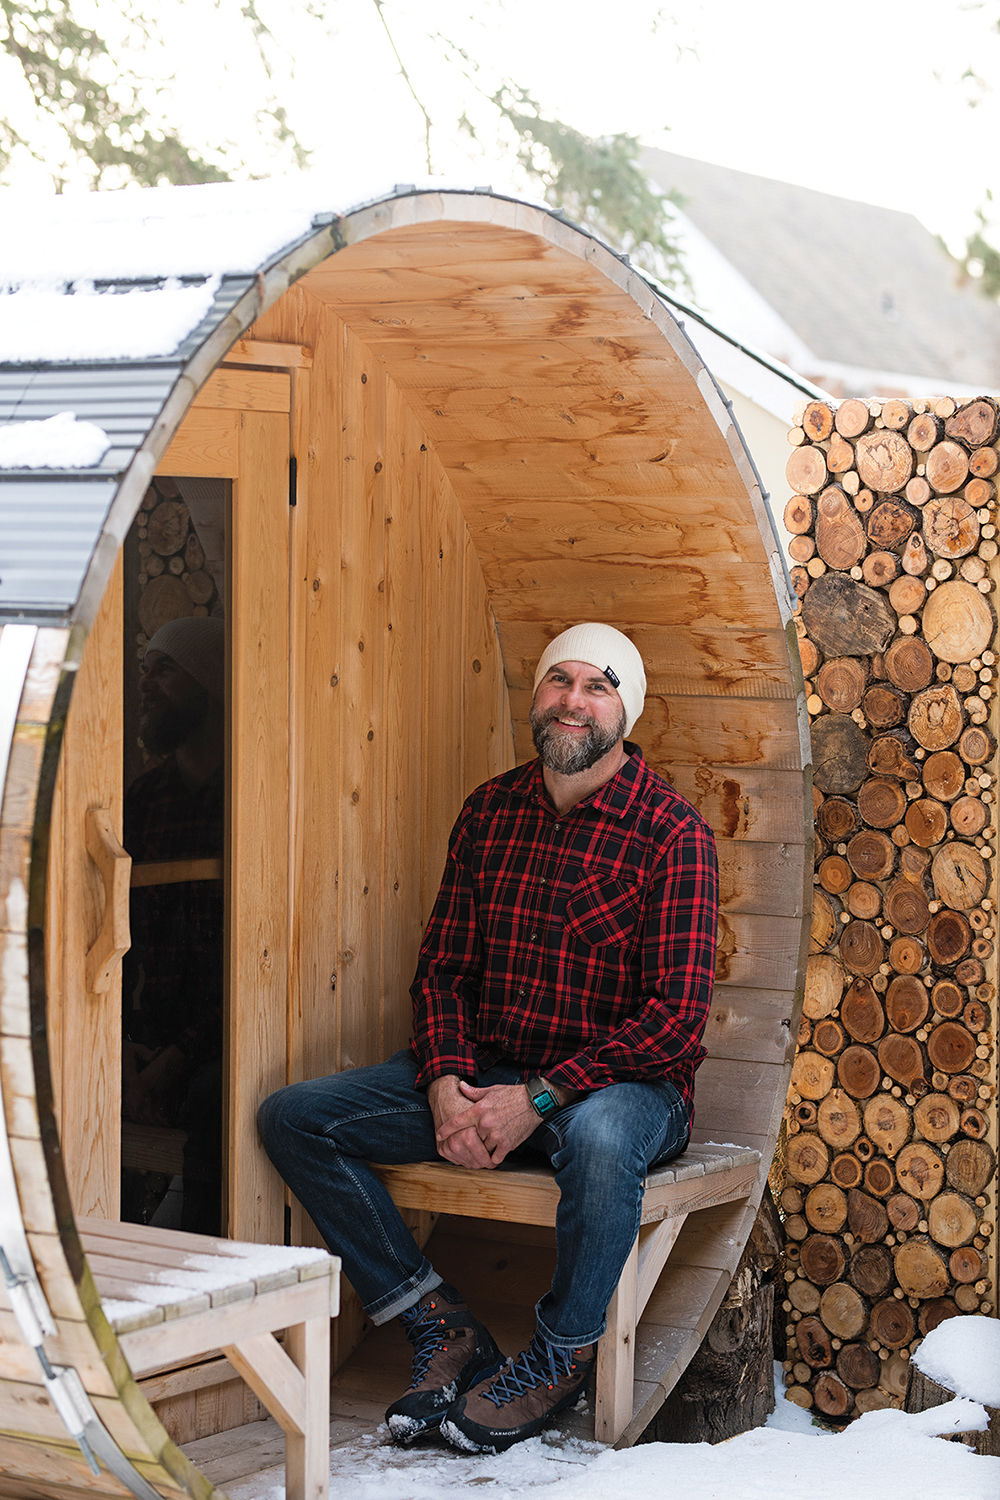 Ryan Markham builds custom residential saunas, and says the extreme temperatures help with both physical and mental recovery.